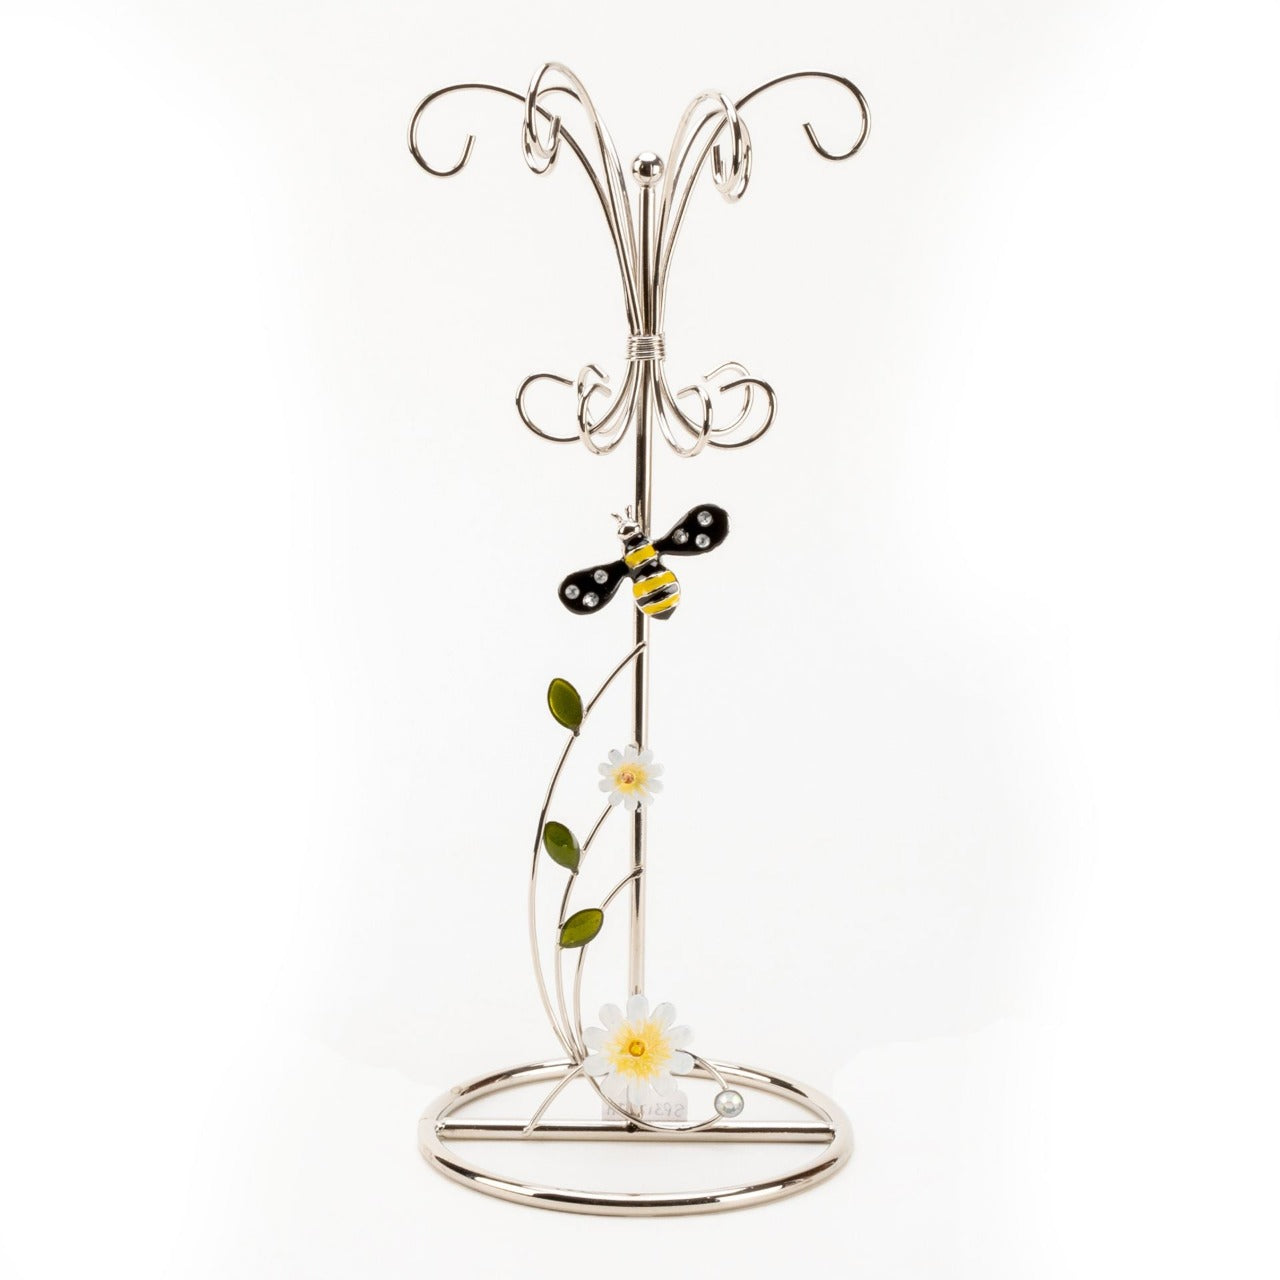 Sophia Classic Glass & Wire Bumble Bee Jewellery Holder  A delightful silver metal wire bumblebee jewellery hanger with colourful enamel. From SOPHIA® - the home of sophistication in women's giftware.